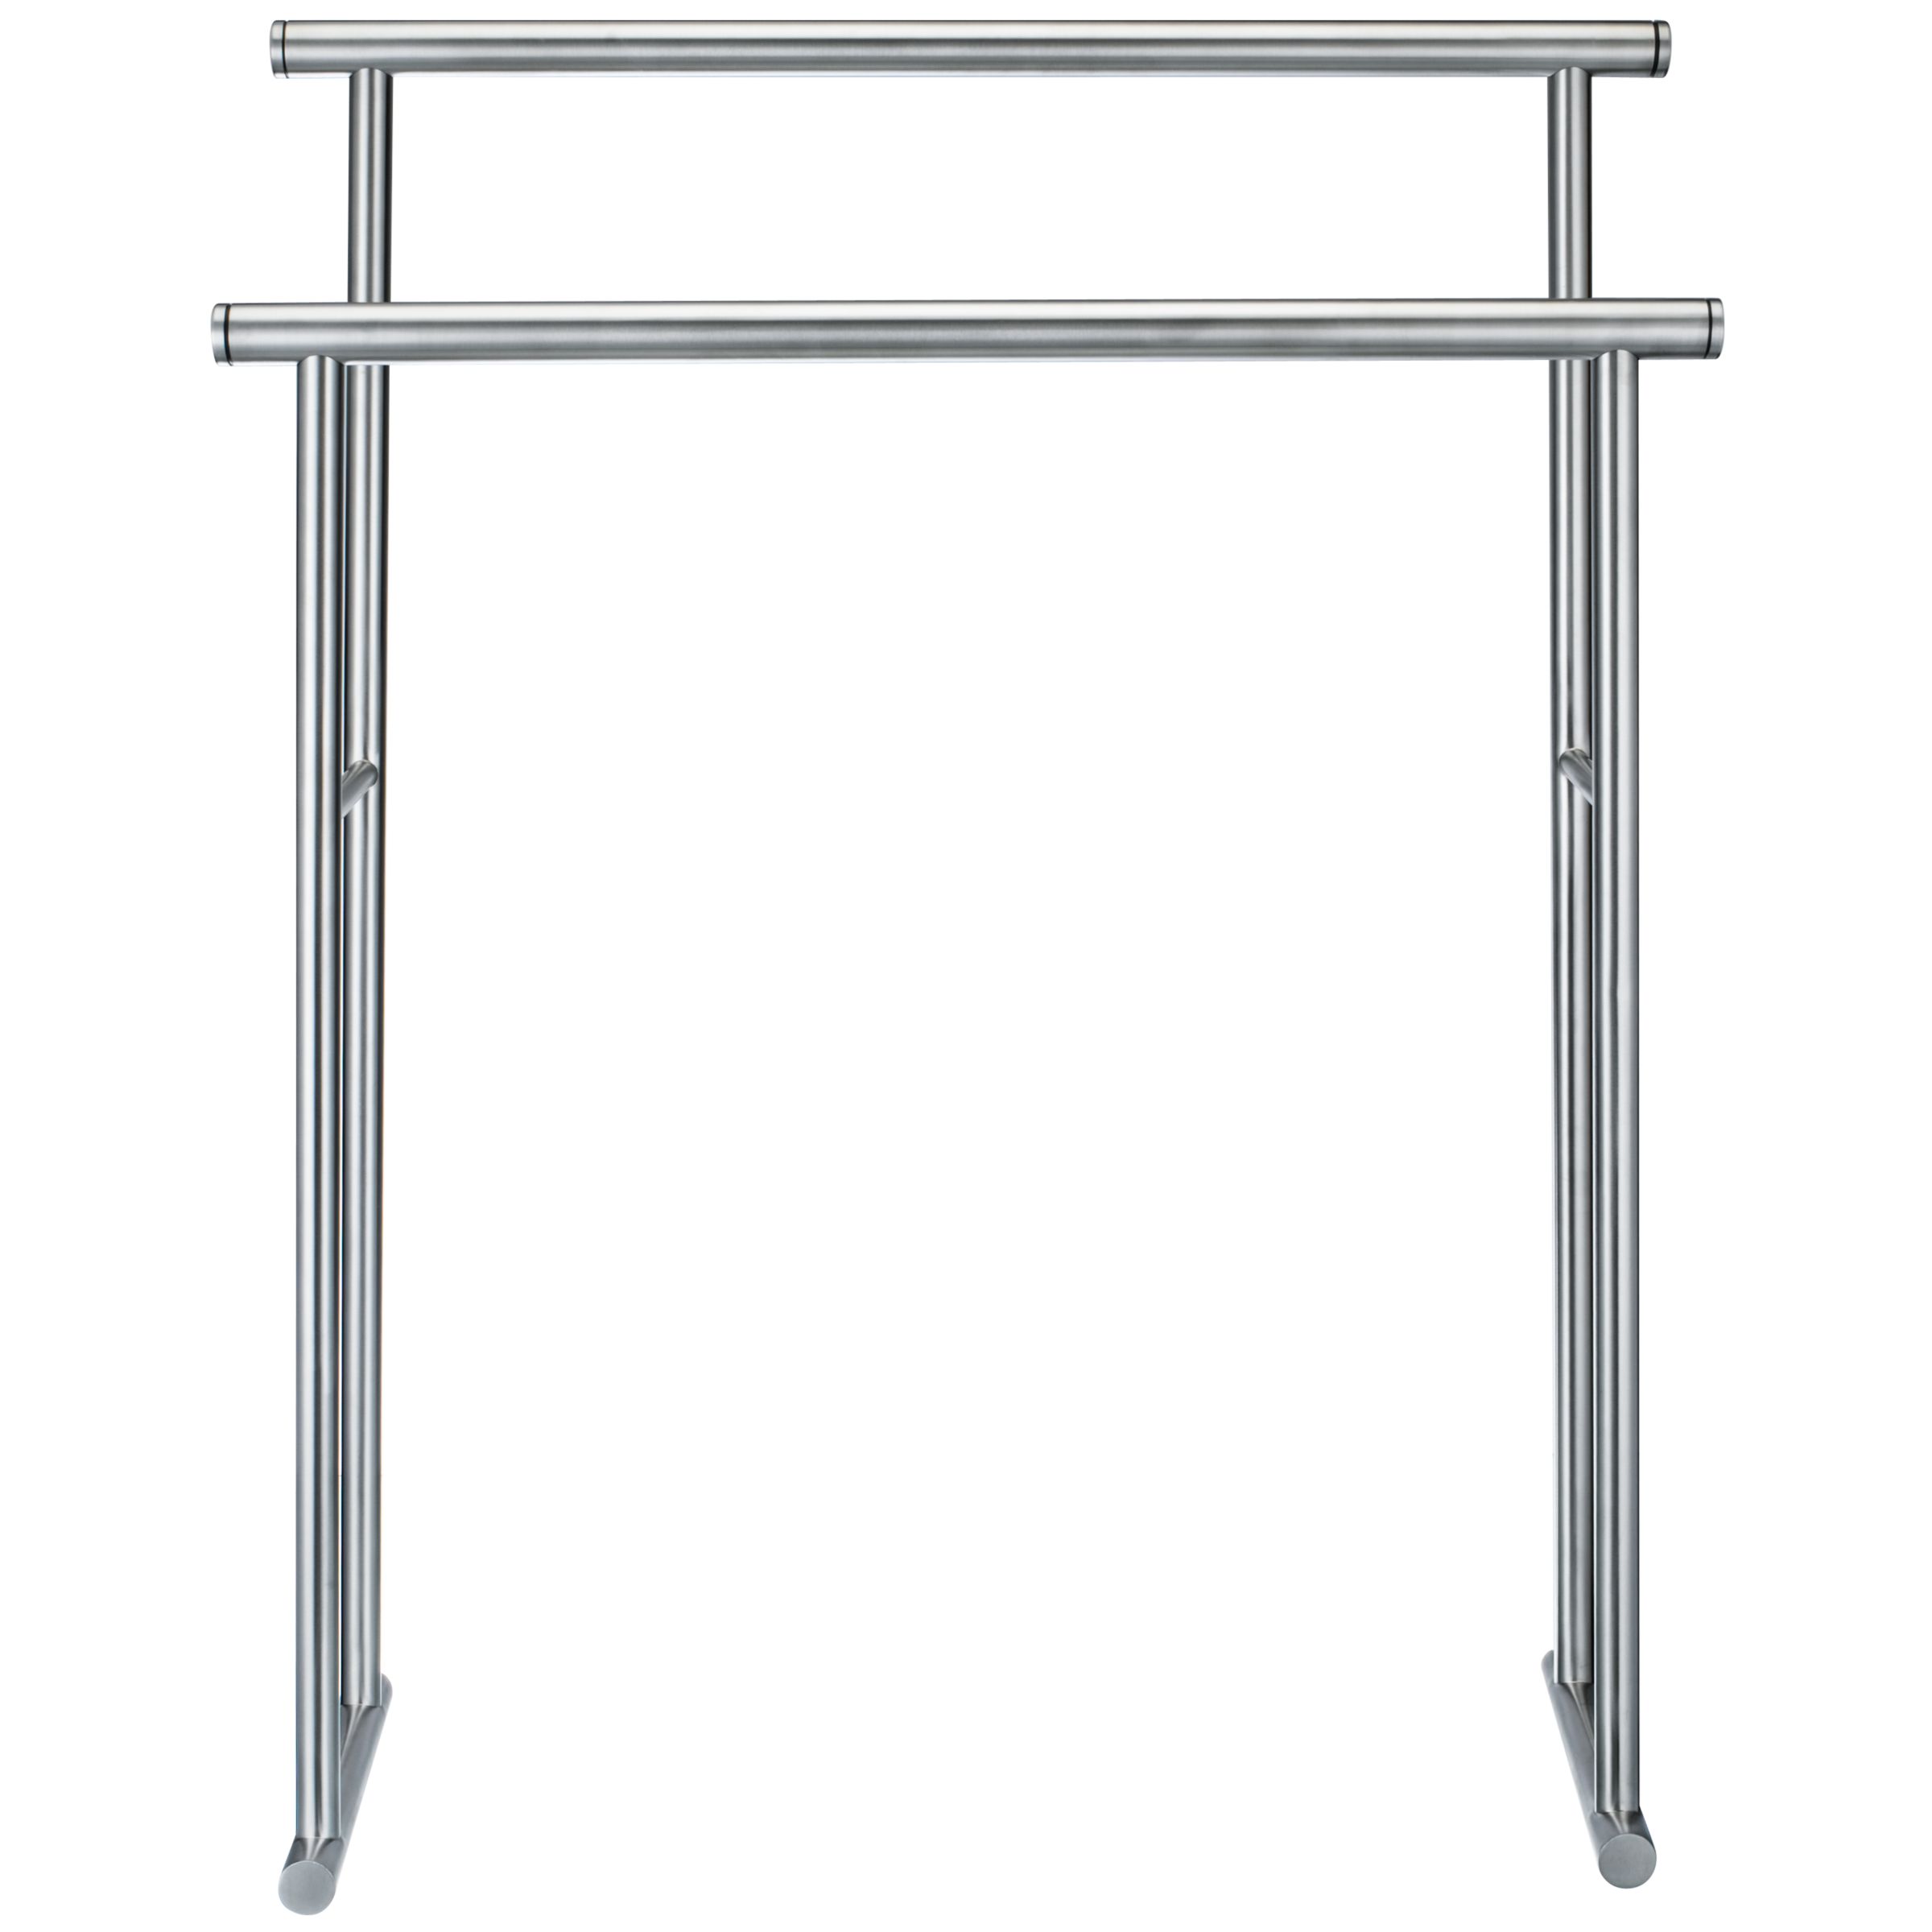 Zack Stainless Steel Towel Stand